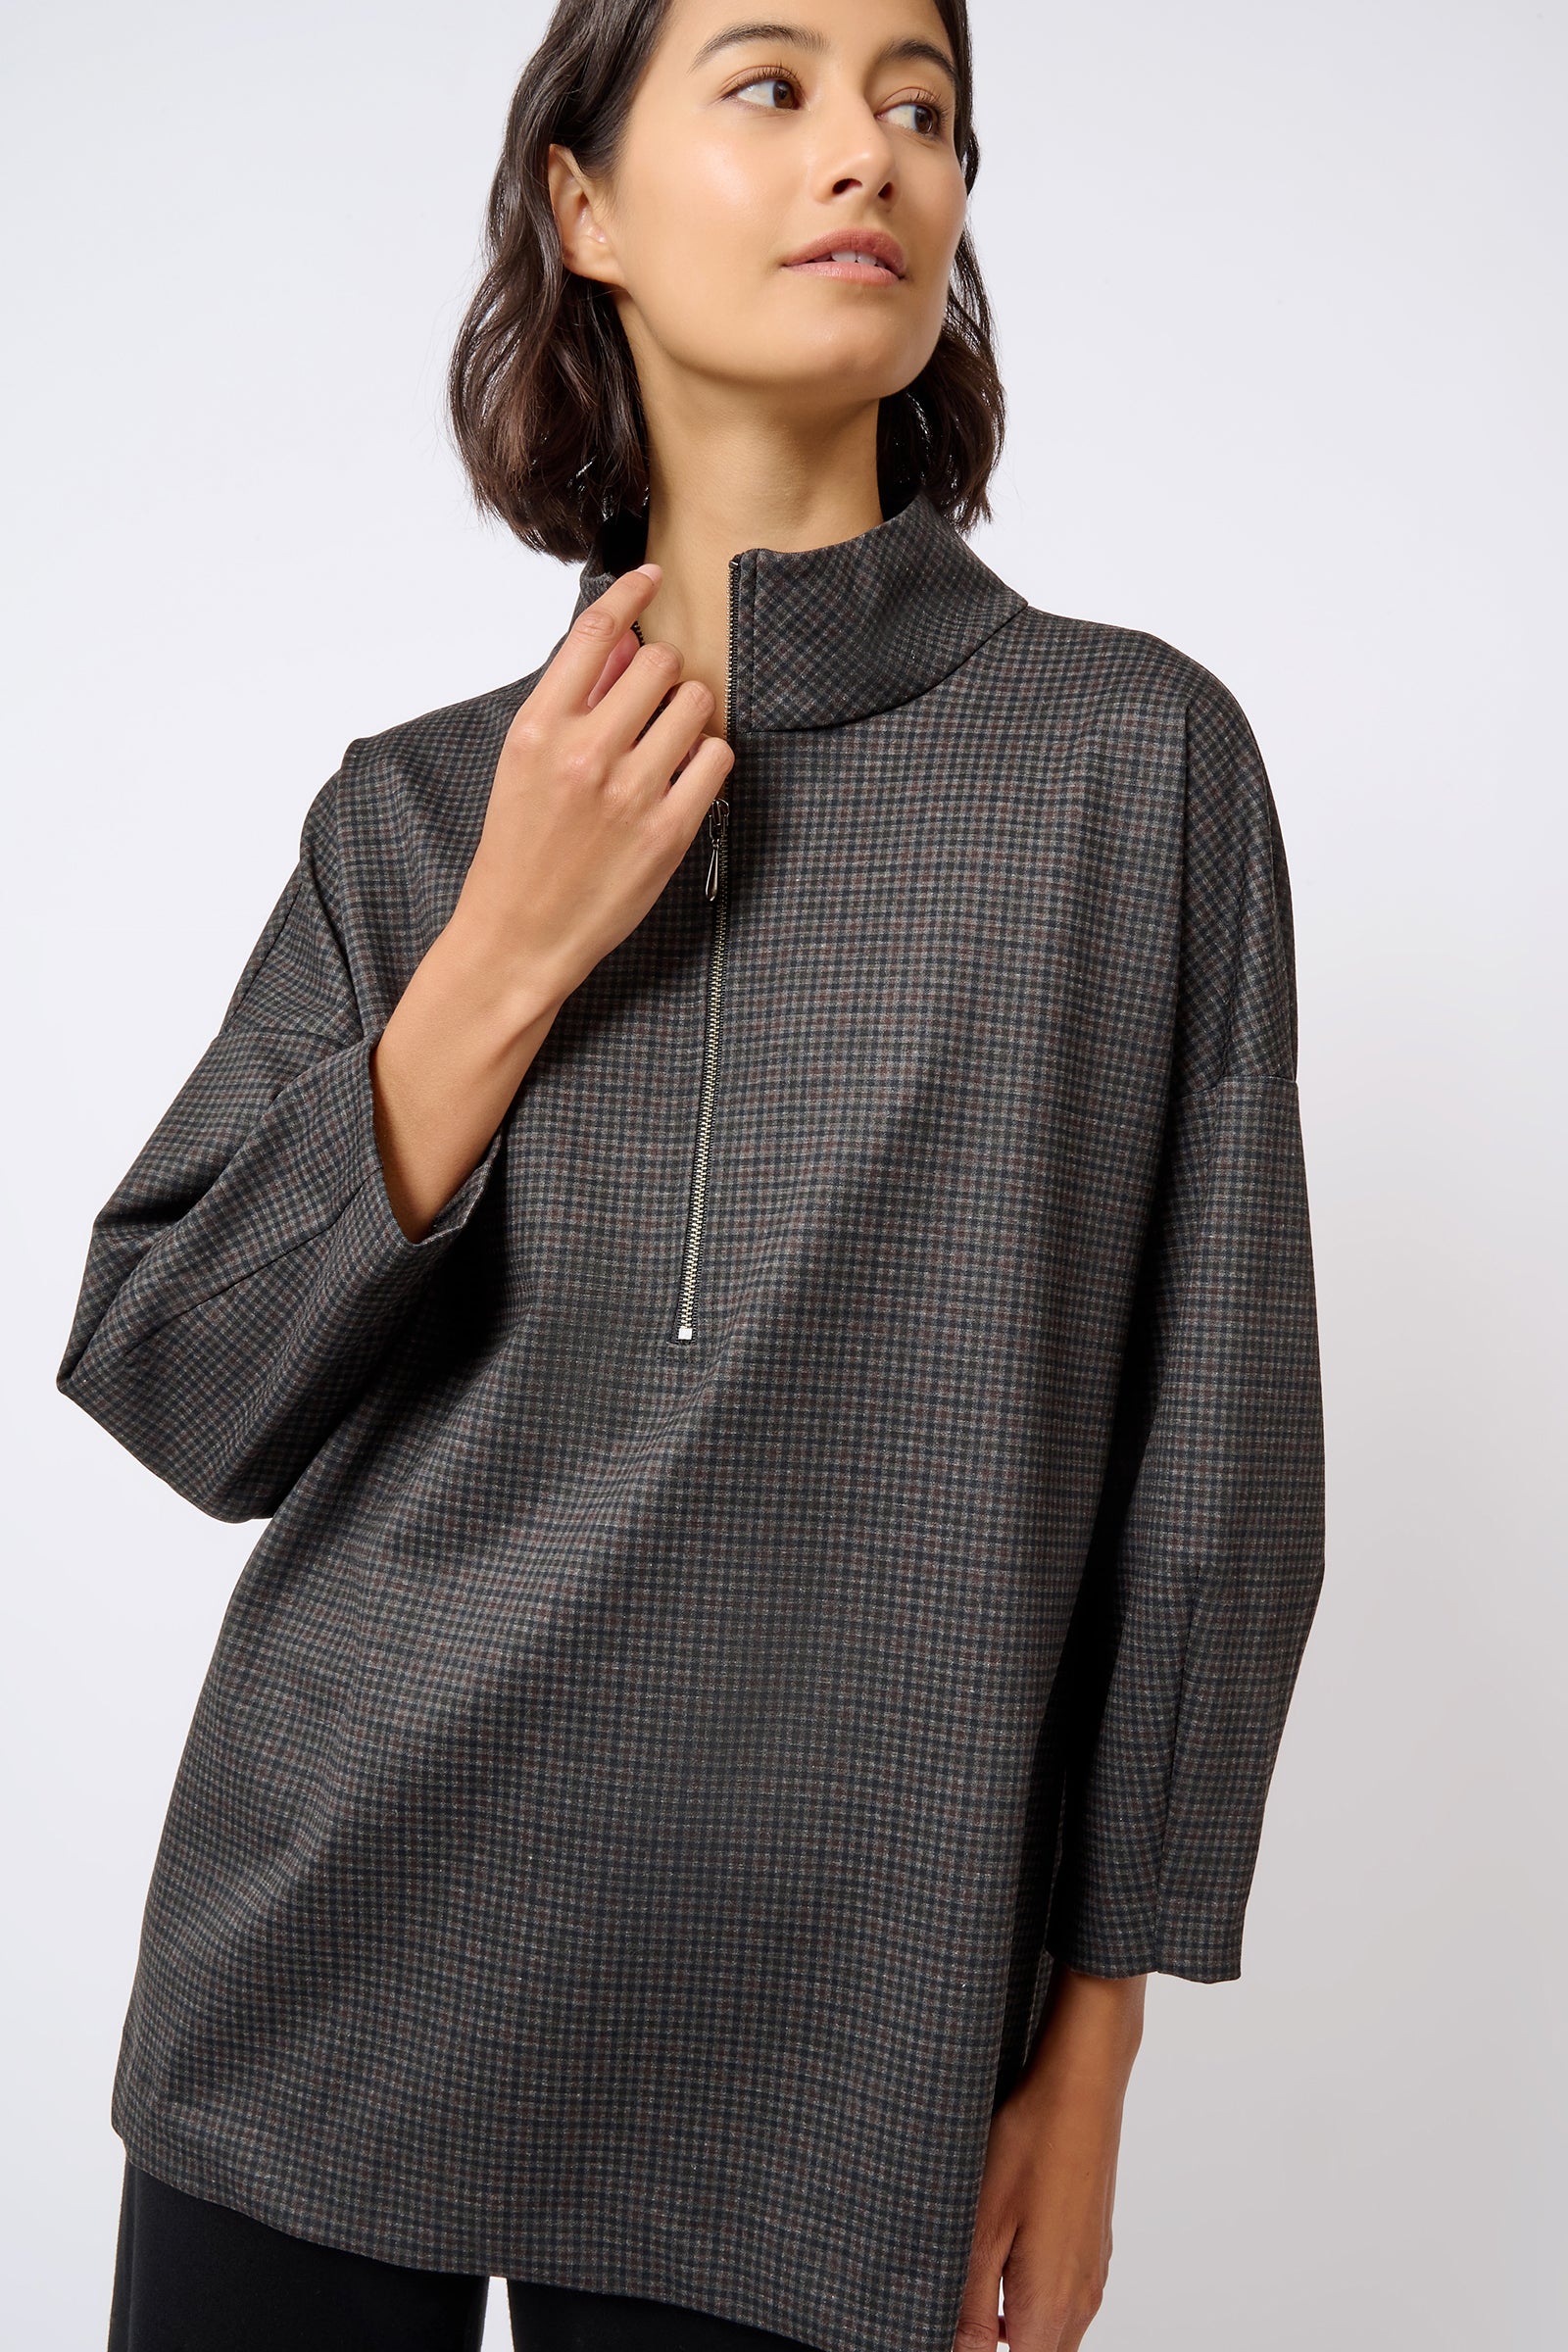 Kal Rieman Zip Mock Top in Mini Check Print on Model with Hand Up Front View